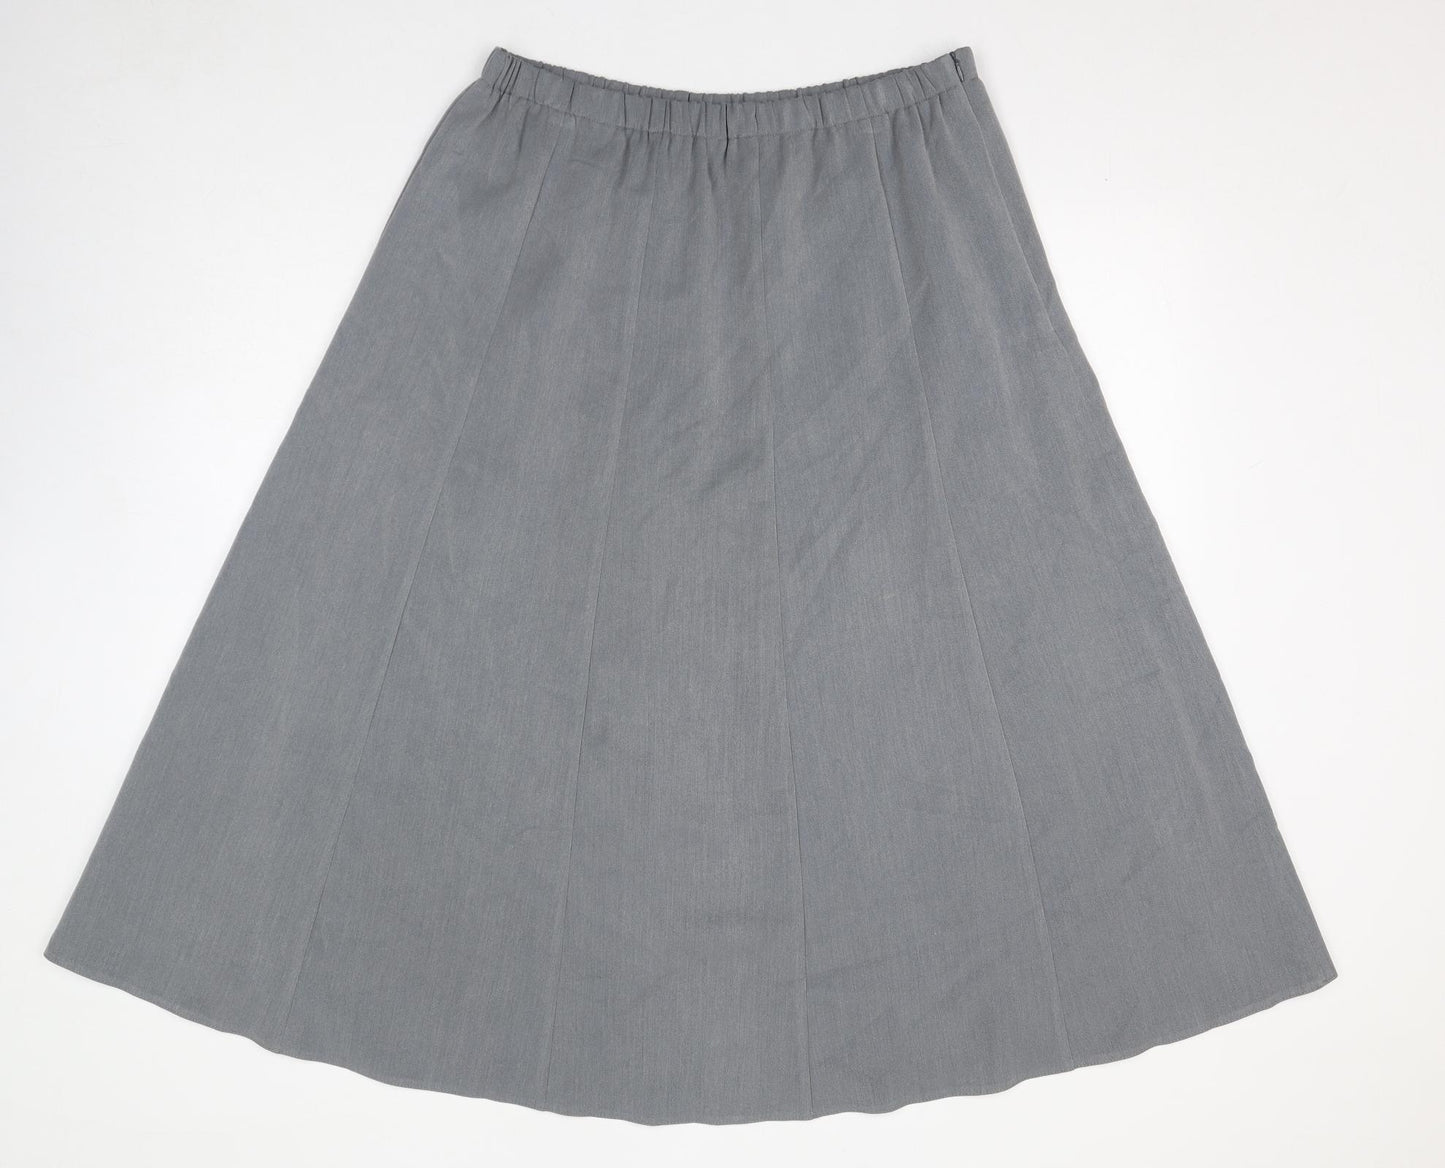 Cotswold Collections Womens Grey Polyester Swing Skirt Size 18 Zip